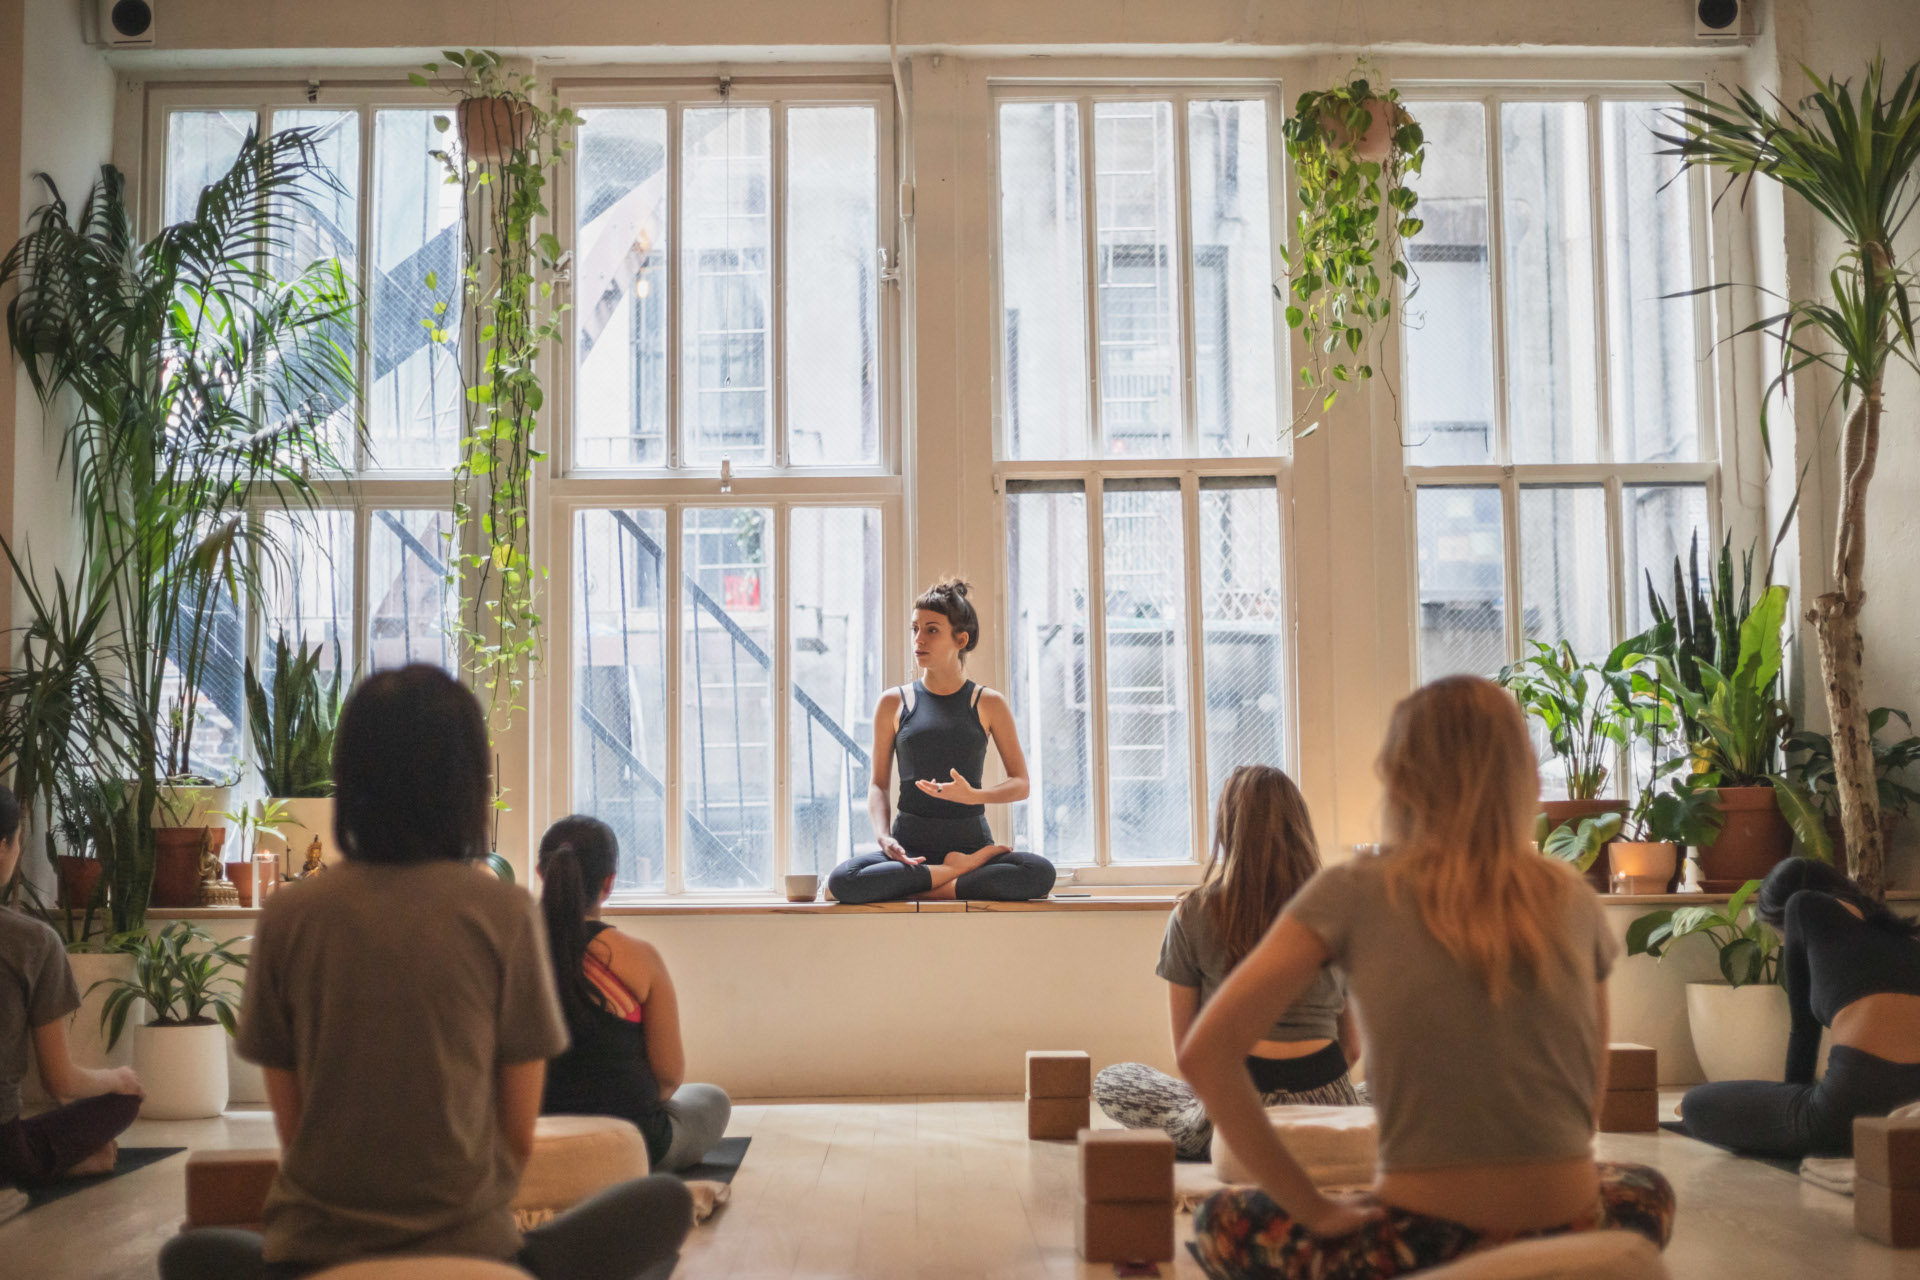 Yoga class in a light studio with large windows